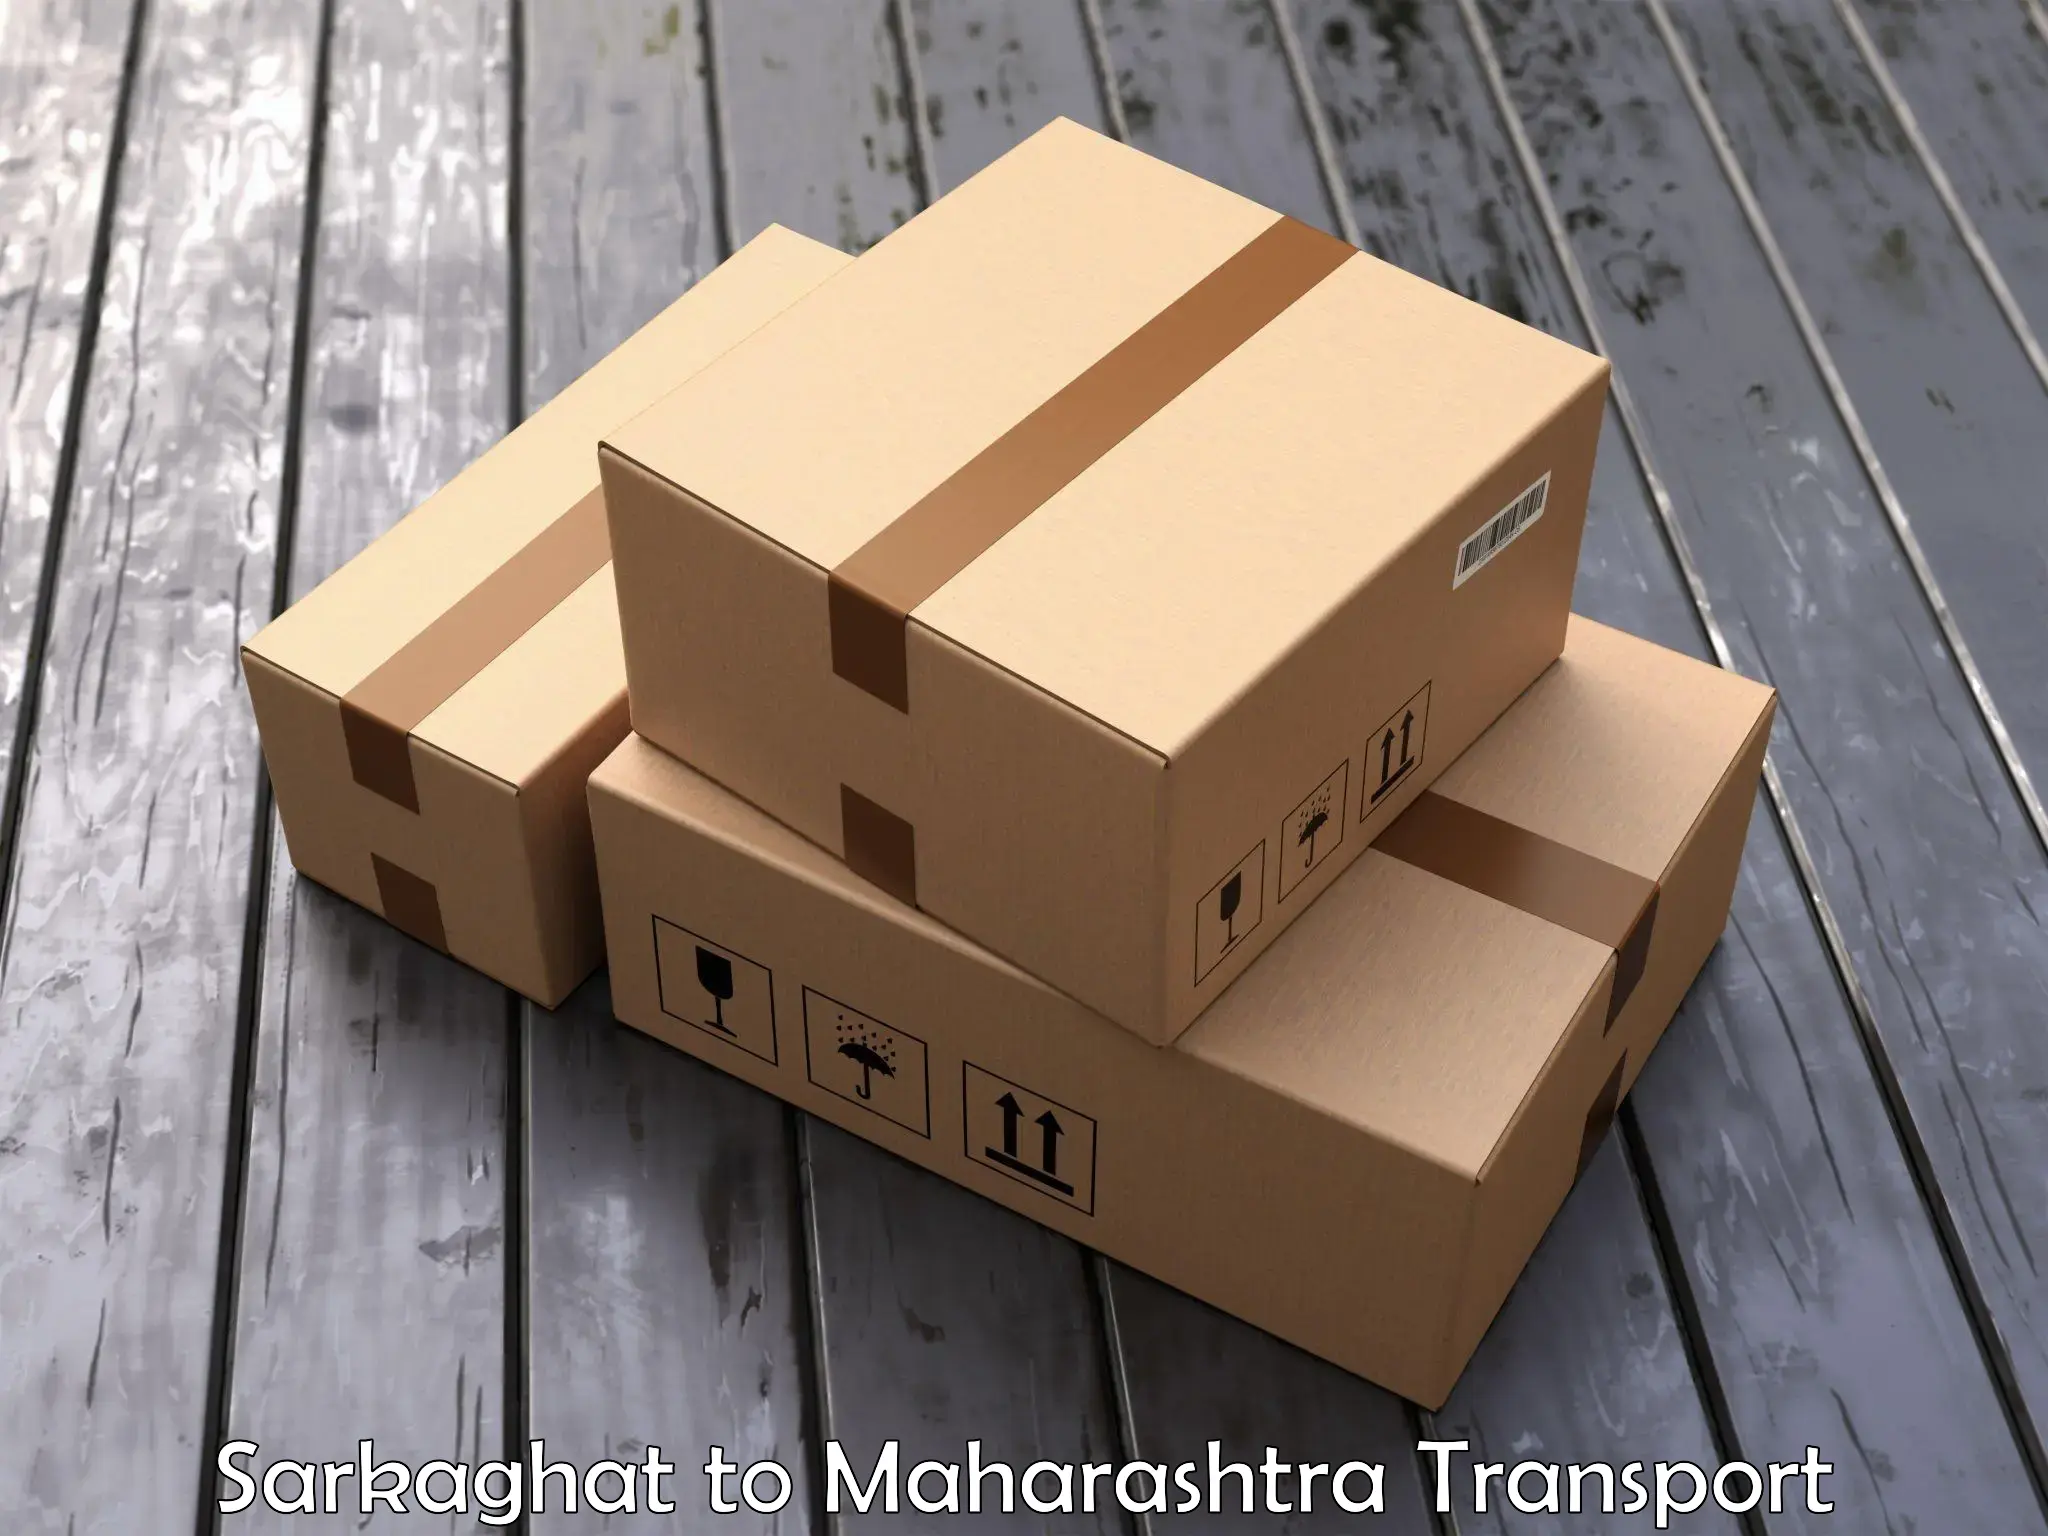 Air freight transport services Sarkaghat to Virar